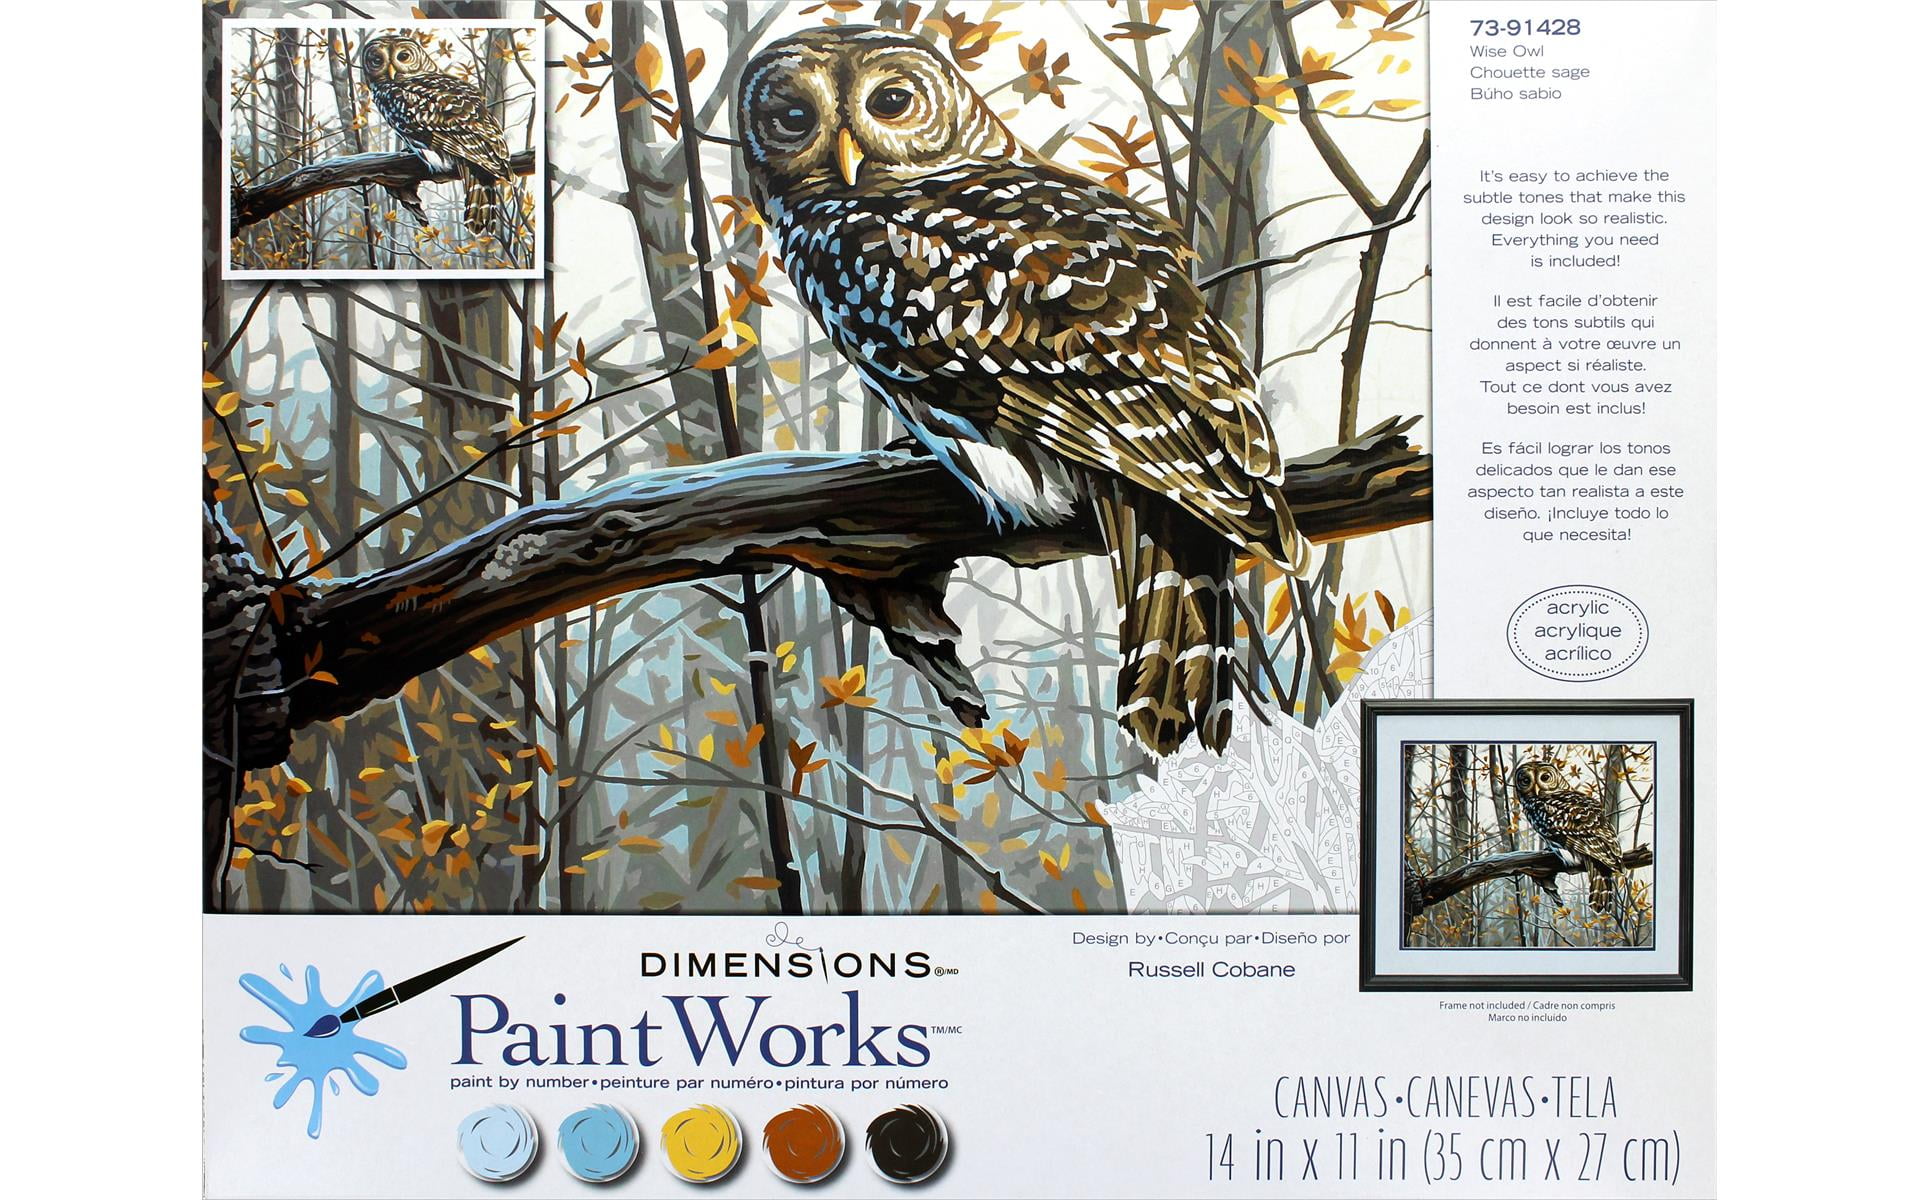 A New Year – A New Product Line to Review: Wise Owl Paint. - The